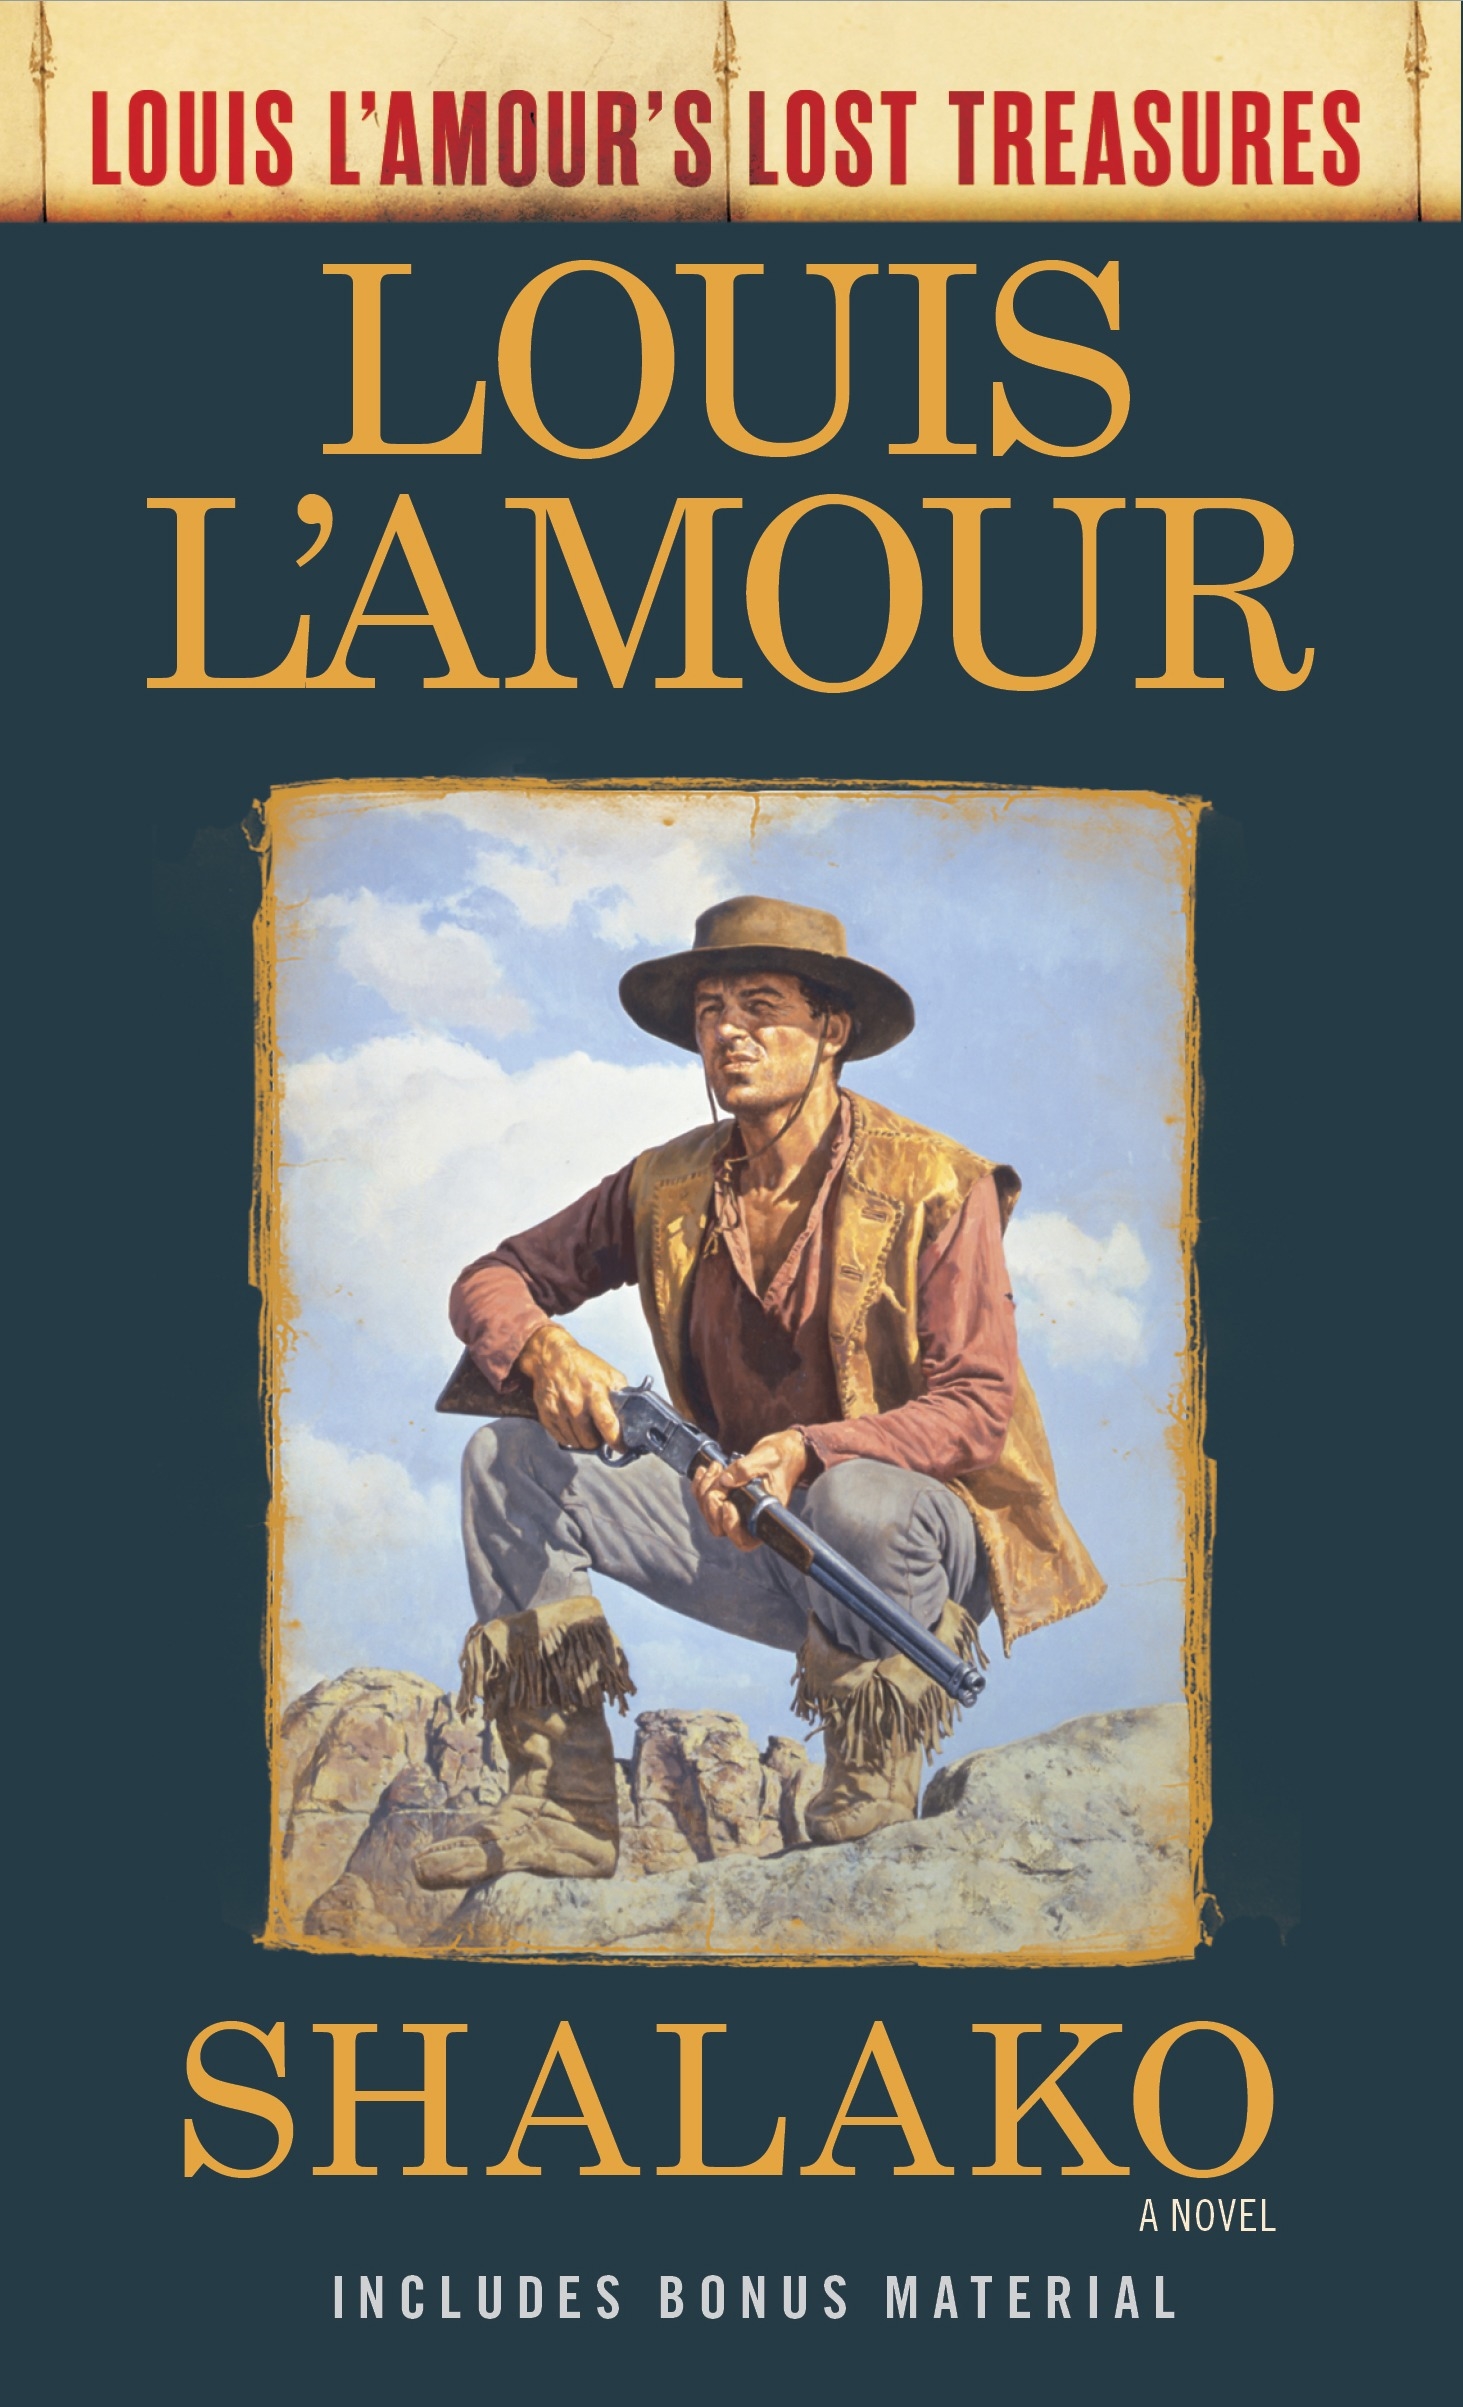 Collected Short Stories Of Louis L'Amour, Volume 6, Part 1,The